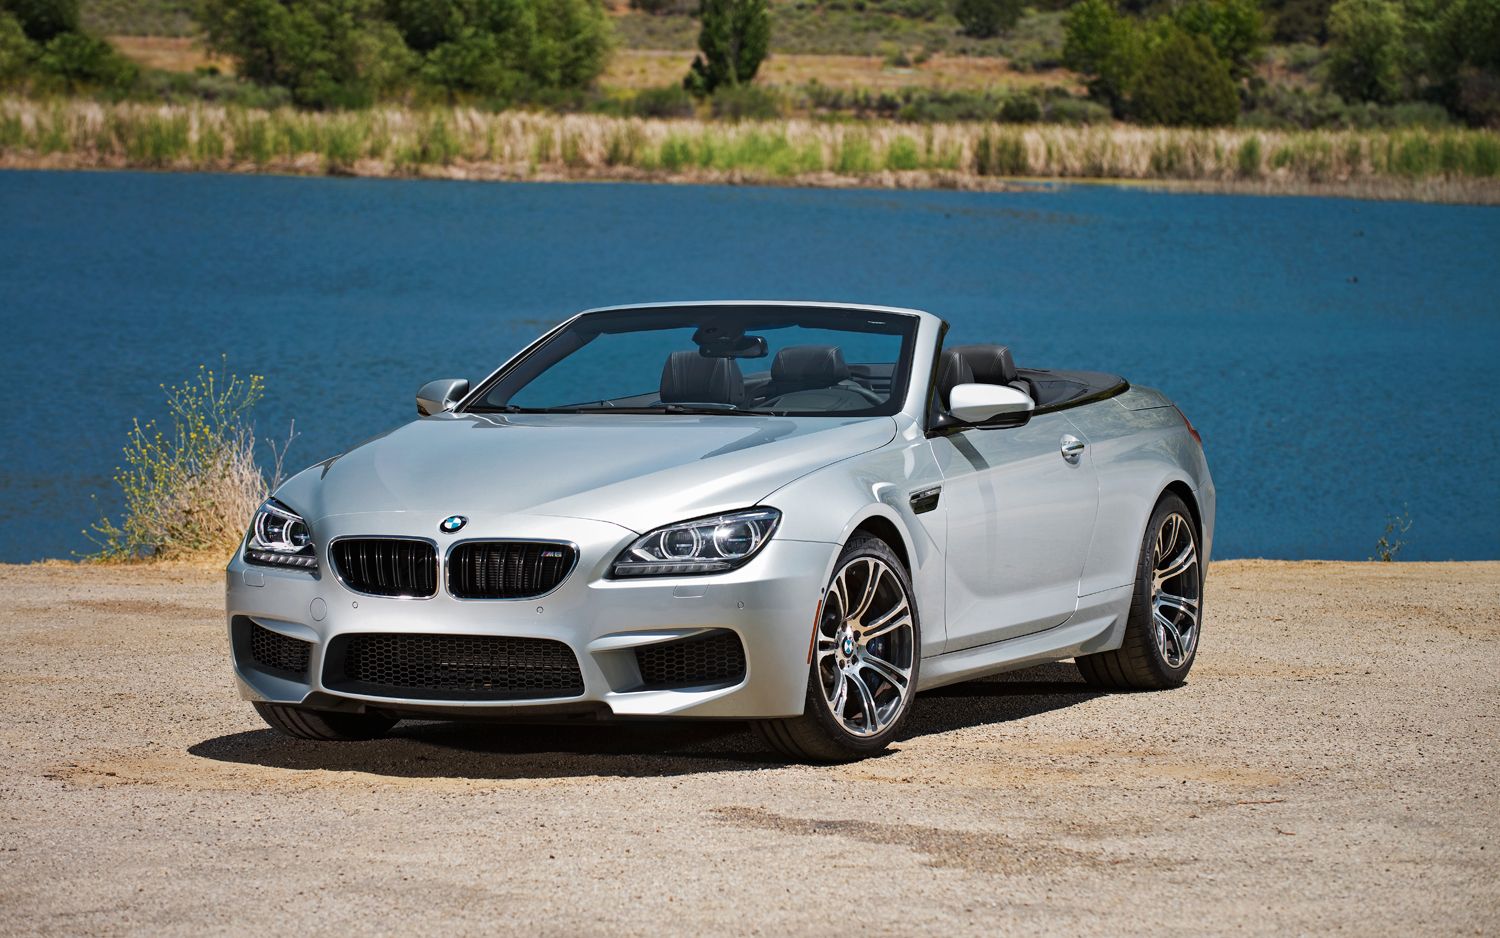 Bmw M6 Convertible Wallpapers Vehicles Hq Bmw M6 Convertible Pictures 4k Wallpapers 2019